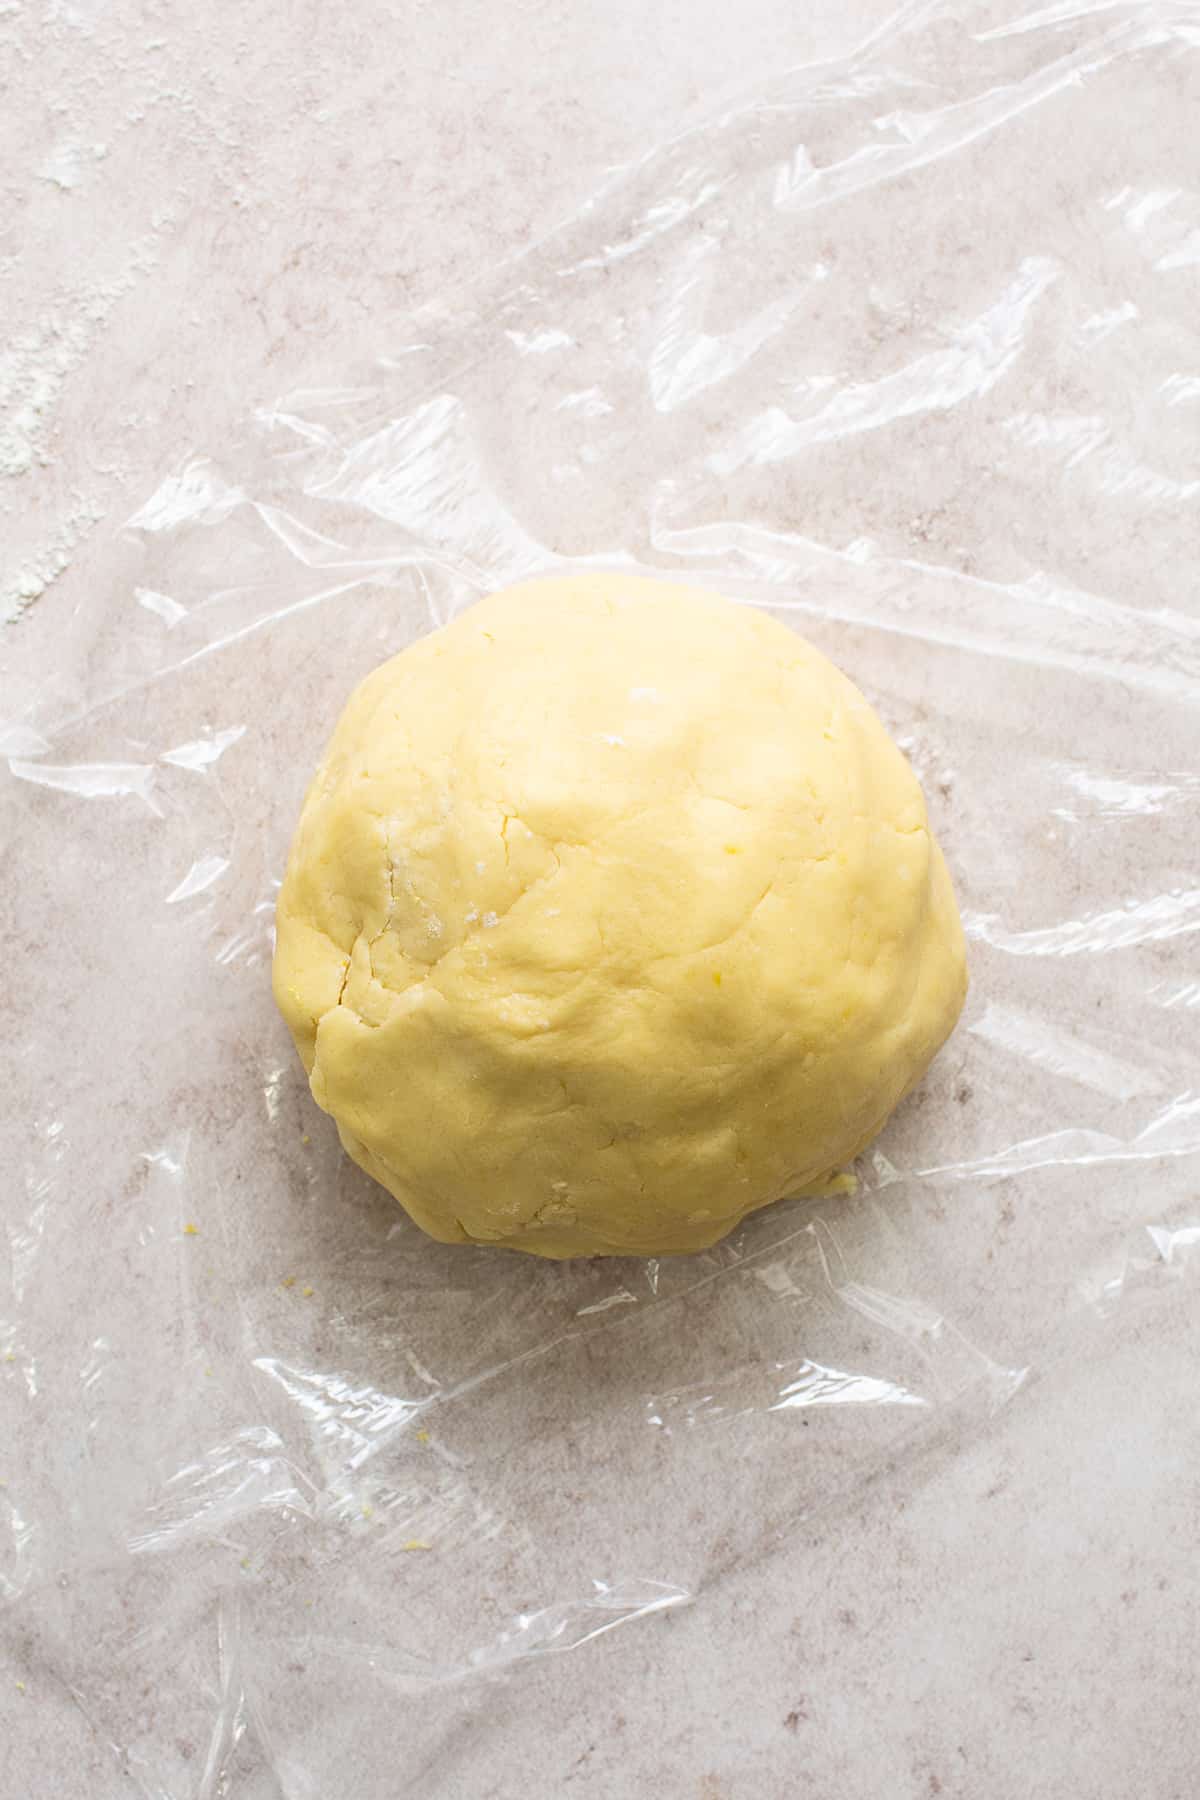 The dough for alfajores on top of a sheet of plastic wrap.